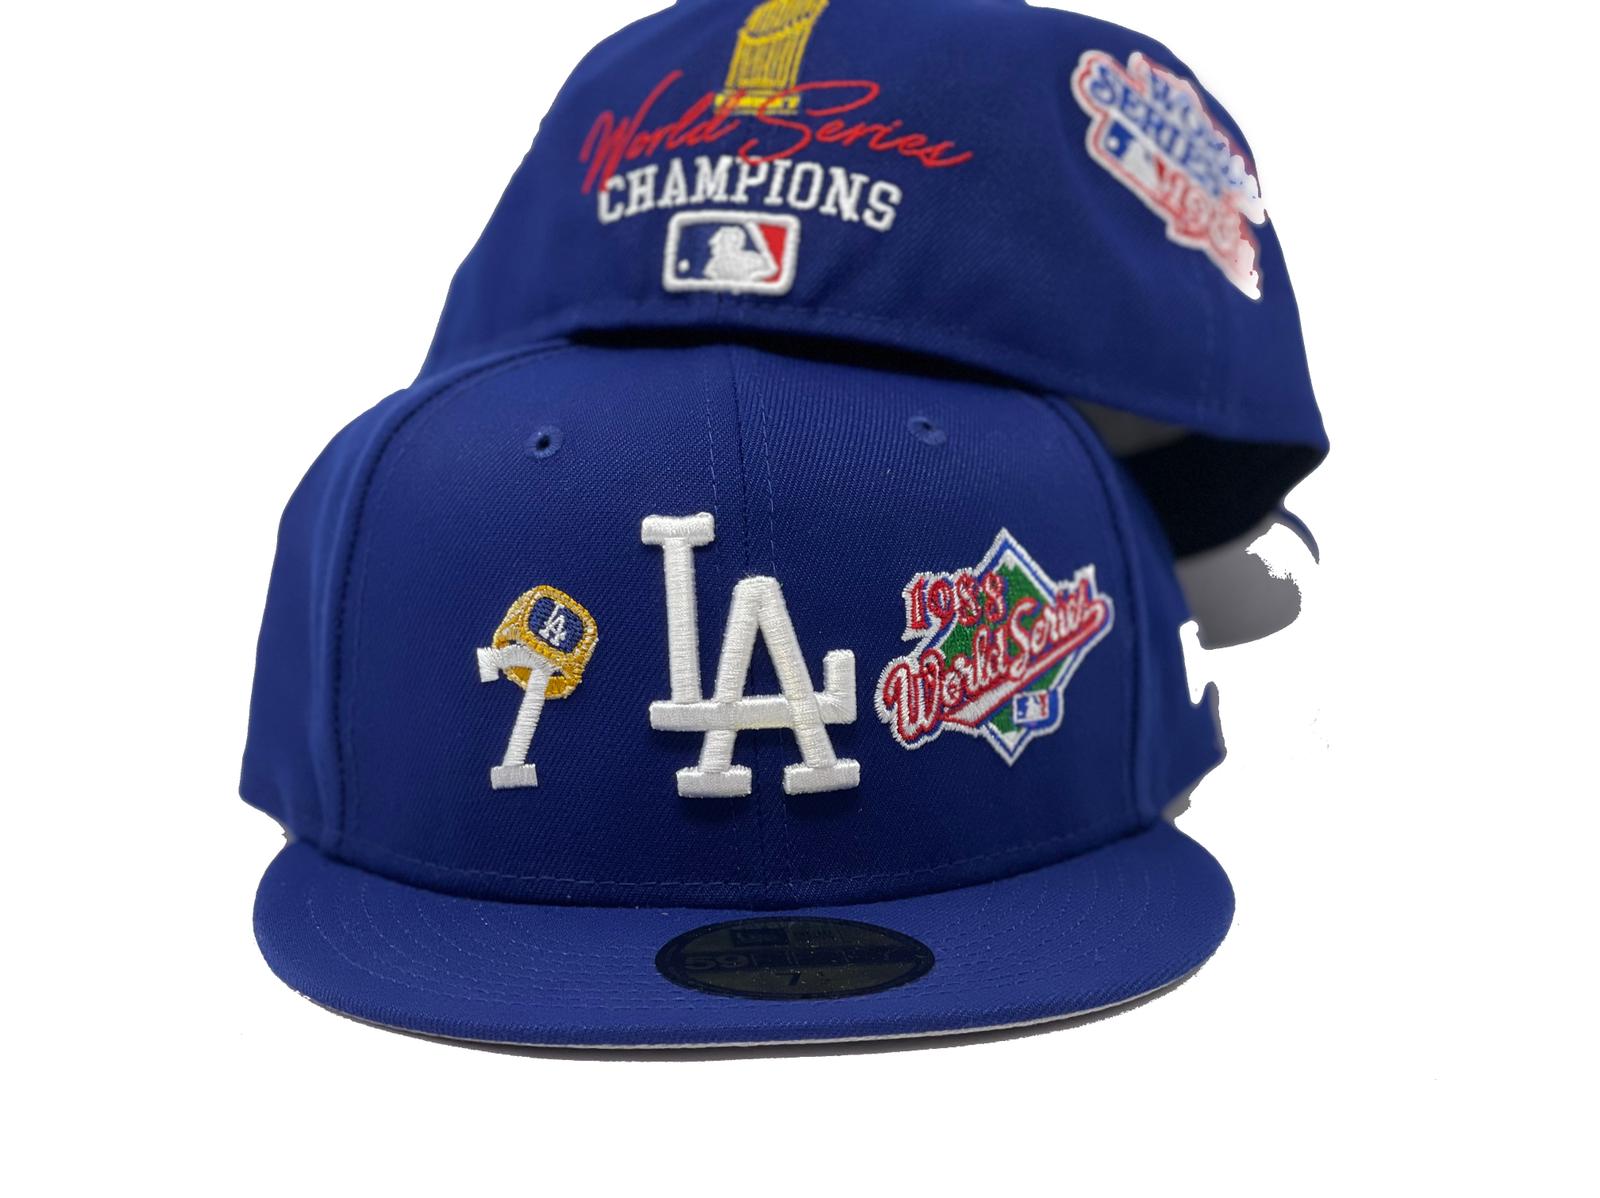 LA Dodgers size 7 fitted hat for Sale in Rosemead, CA - OfferUp